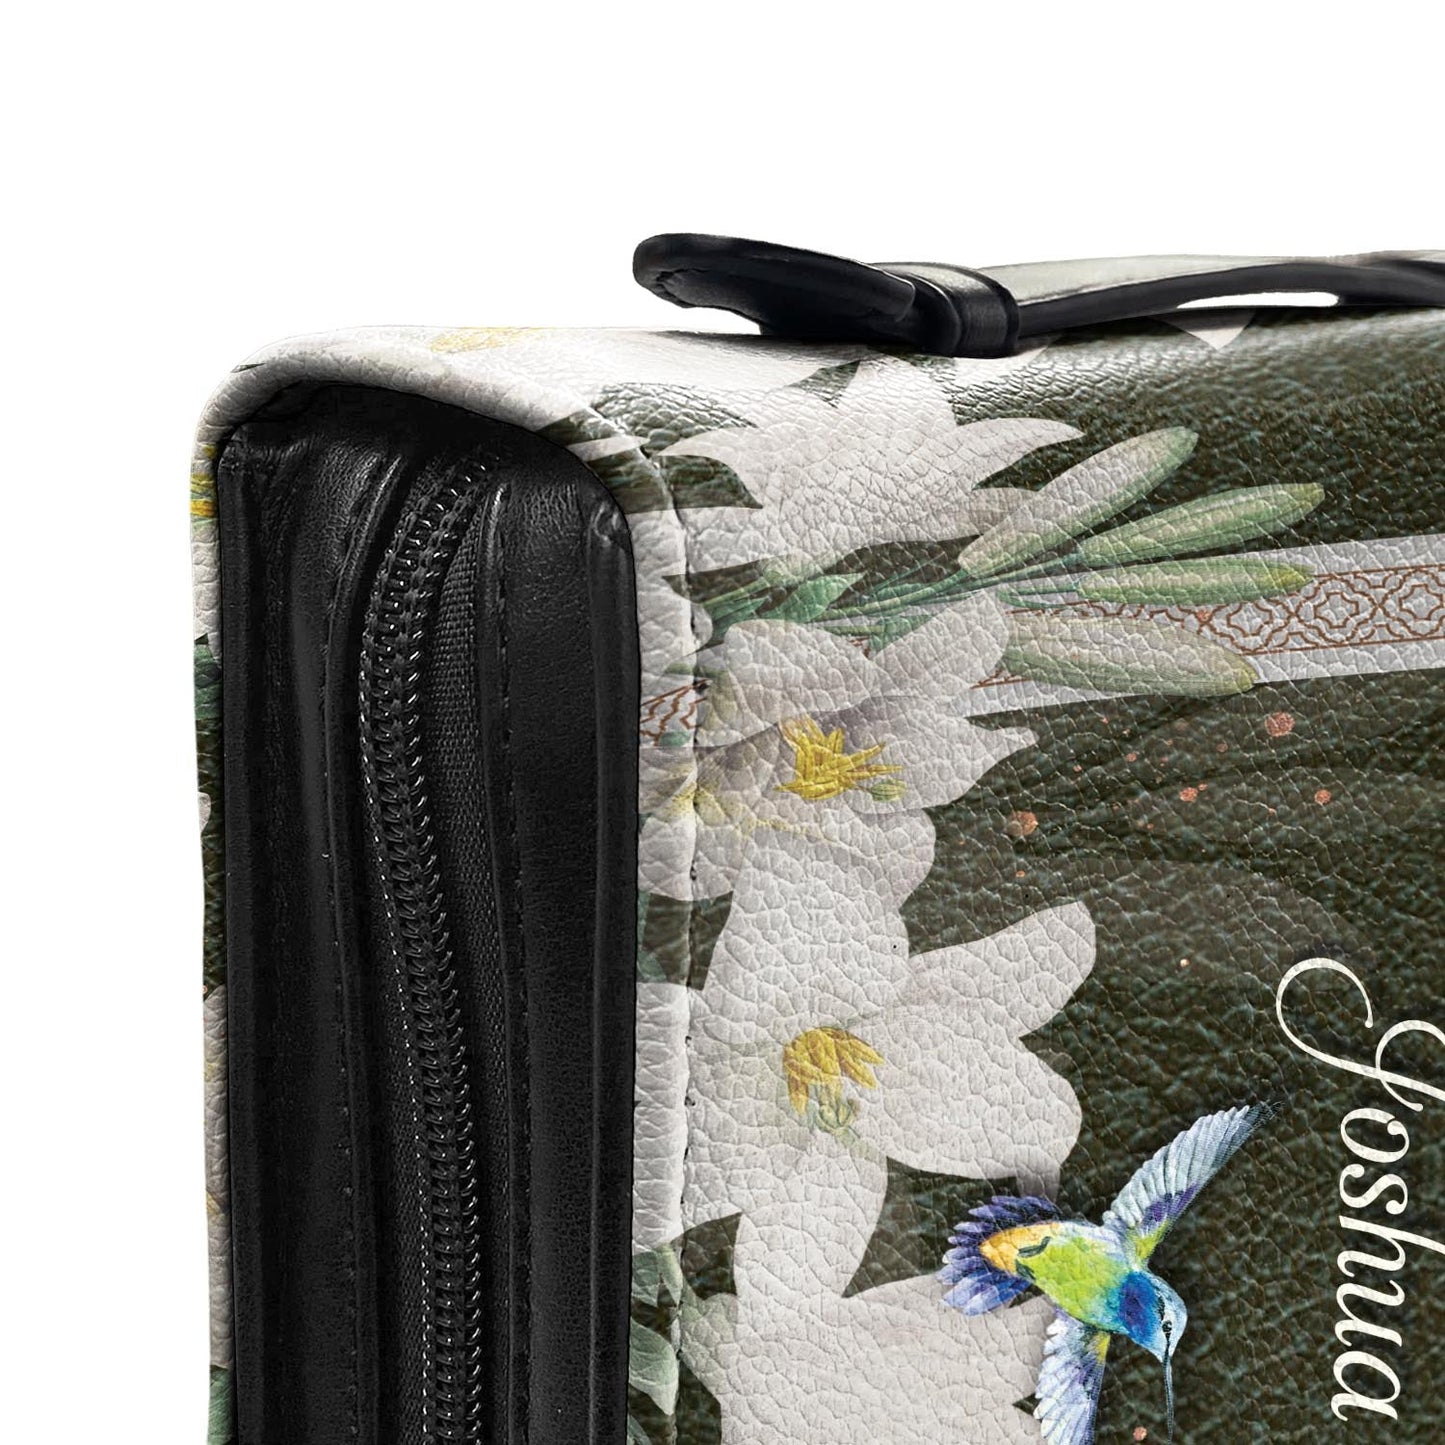  Personalized Bible Cover - Be Strong And Courageous Joshua 1 9 Hummingbird Lily Bible Cover for Christians